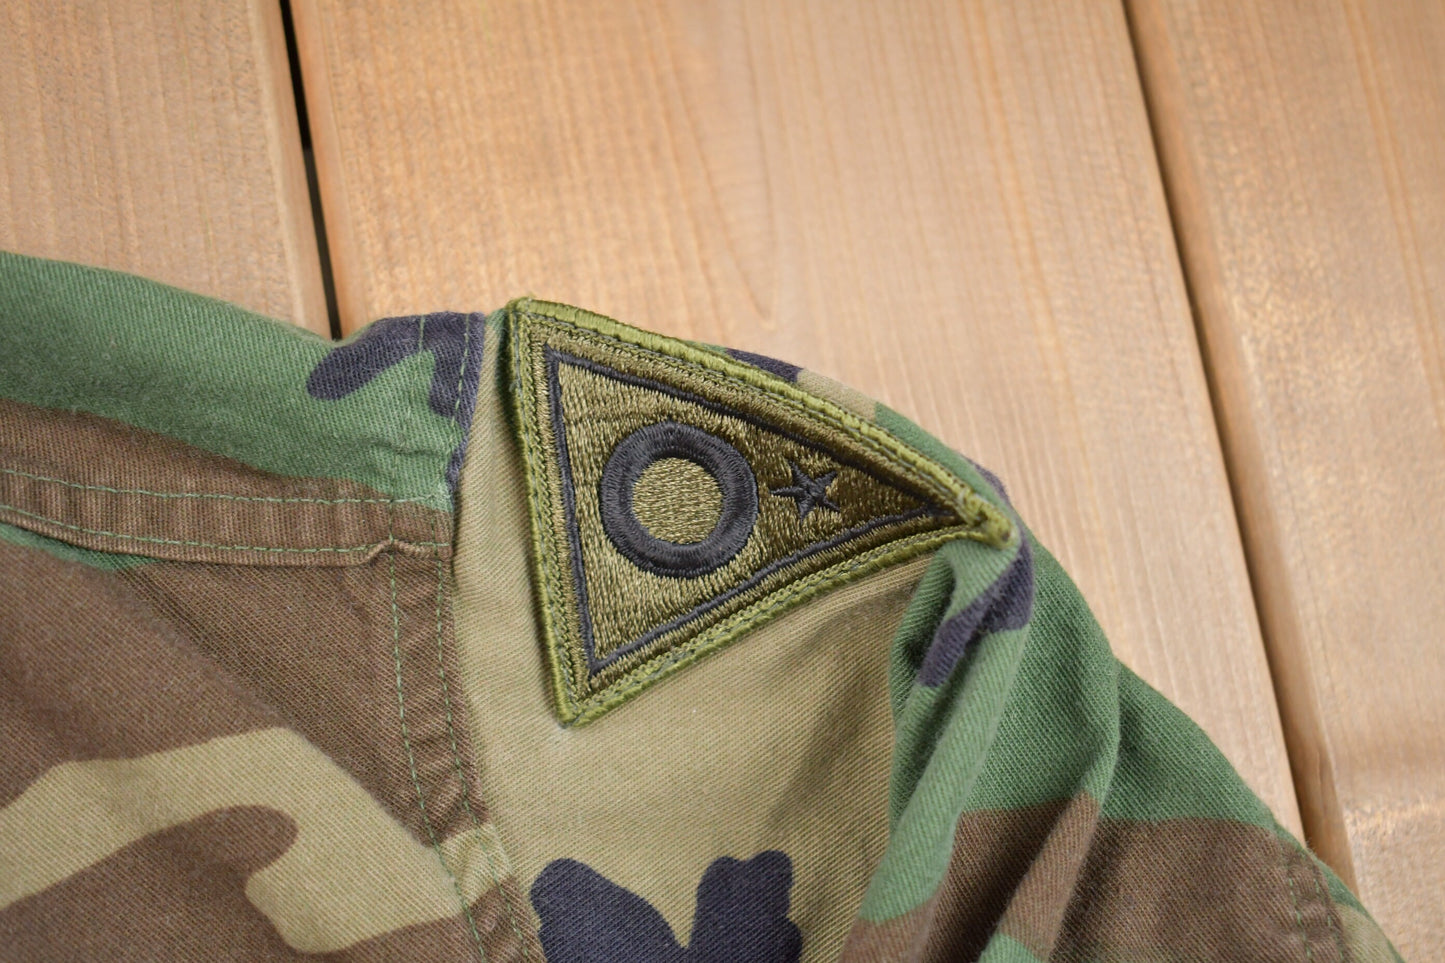 Vintage 2001 US Army Military Jacket / Button Up Jacket / US Army Green / Vintage Army / Streetwear Fashion / Army Jacket